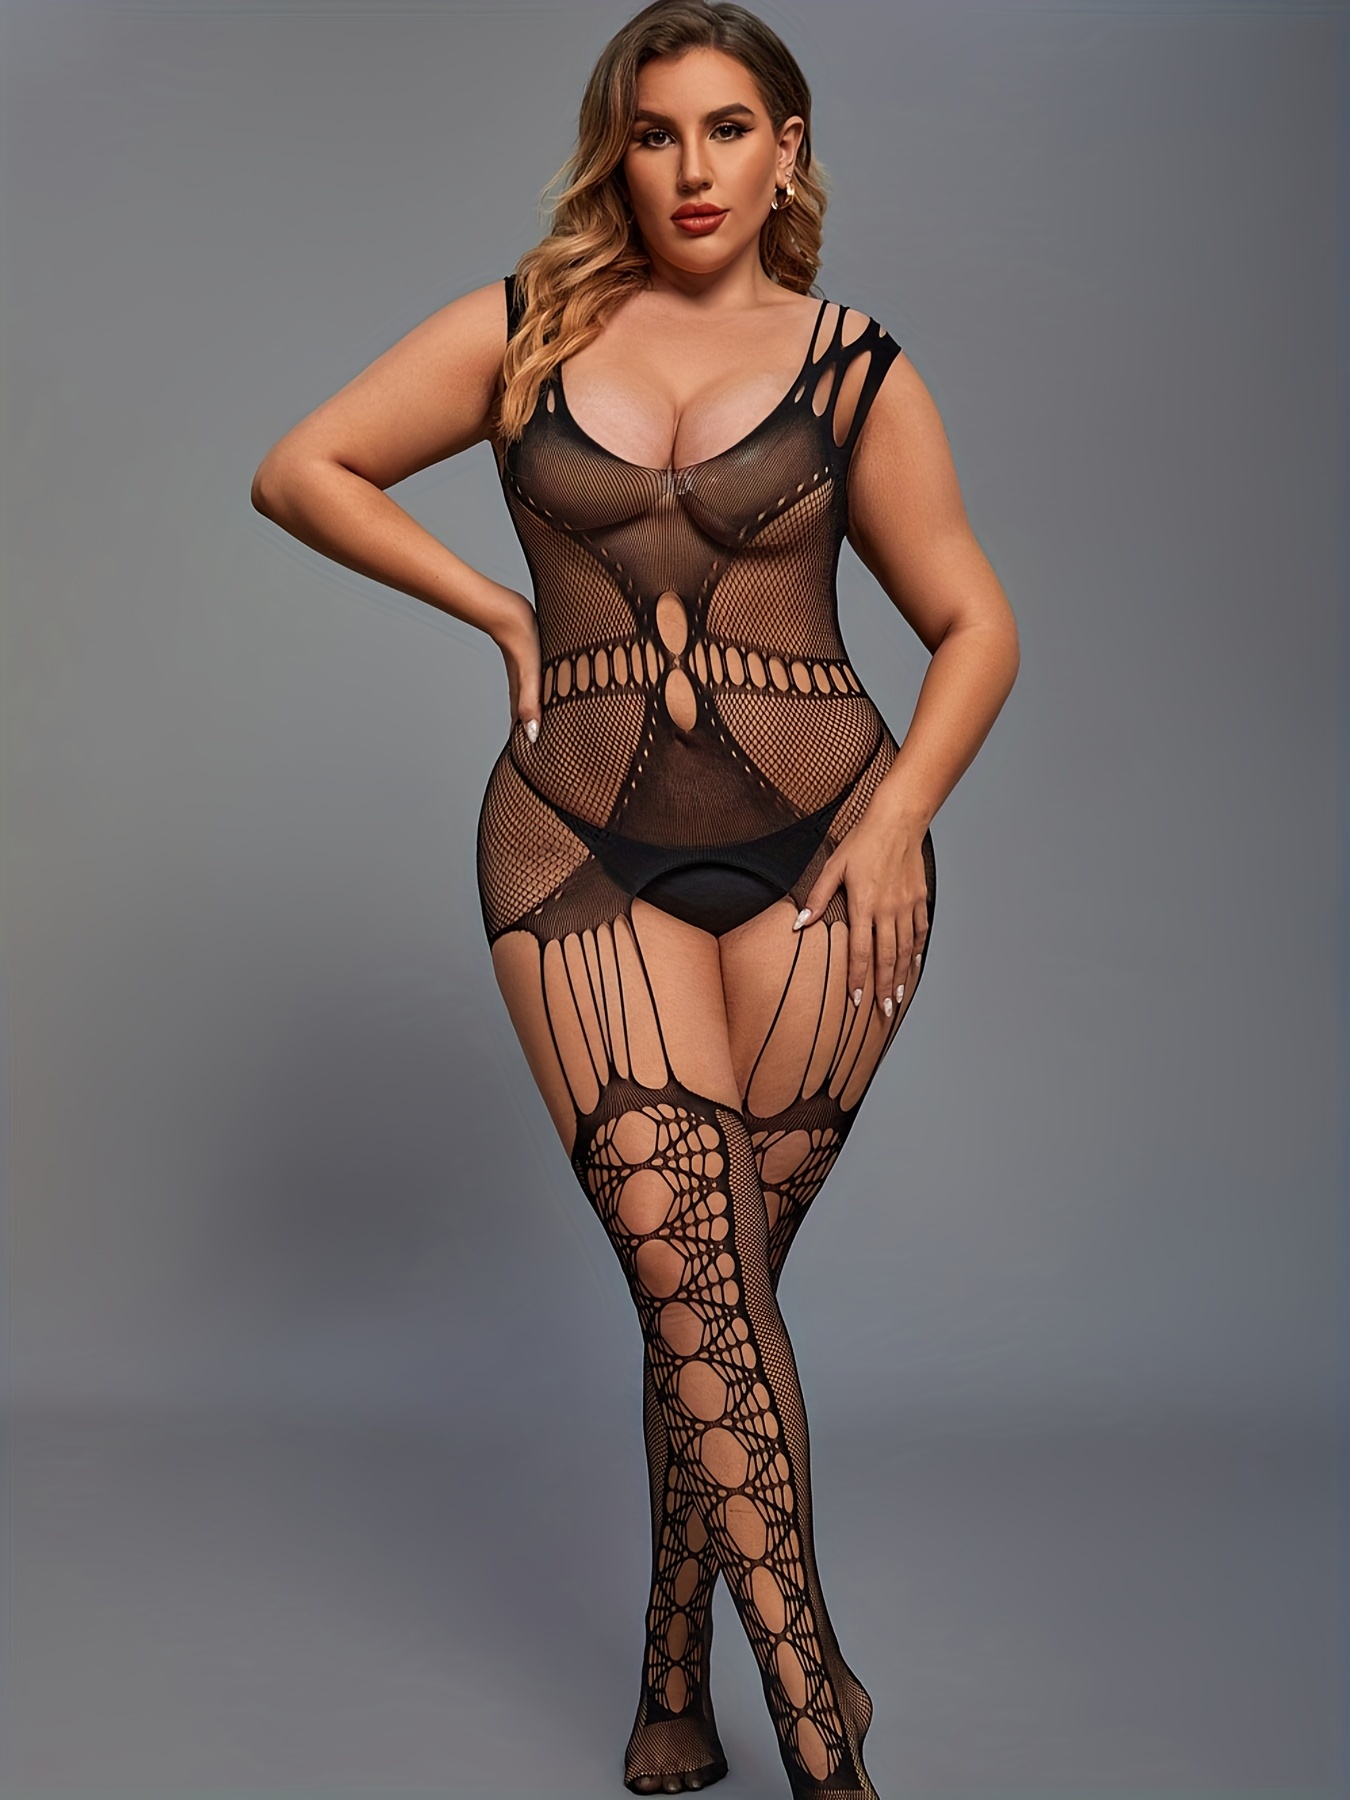 Crotchless Lingerie Bodystocking